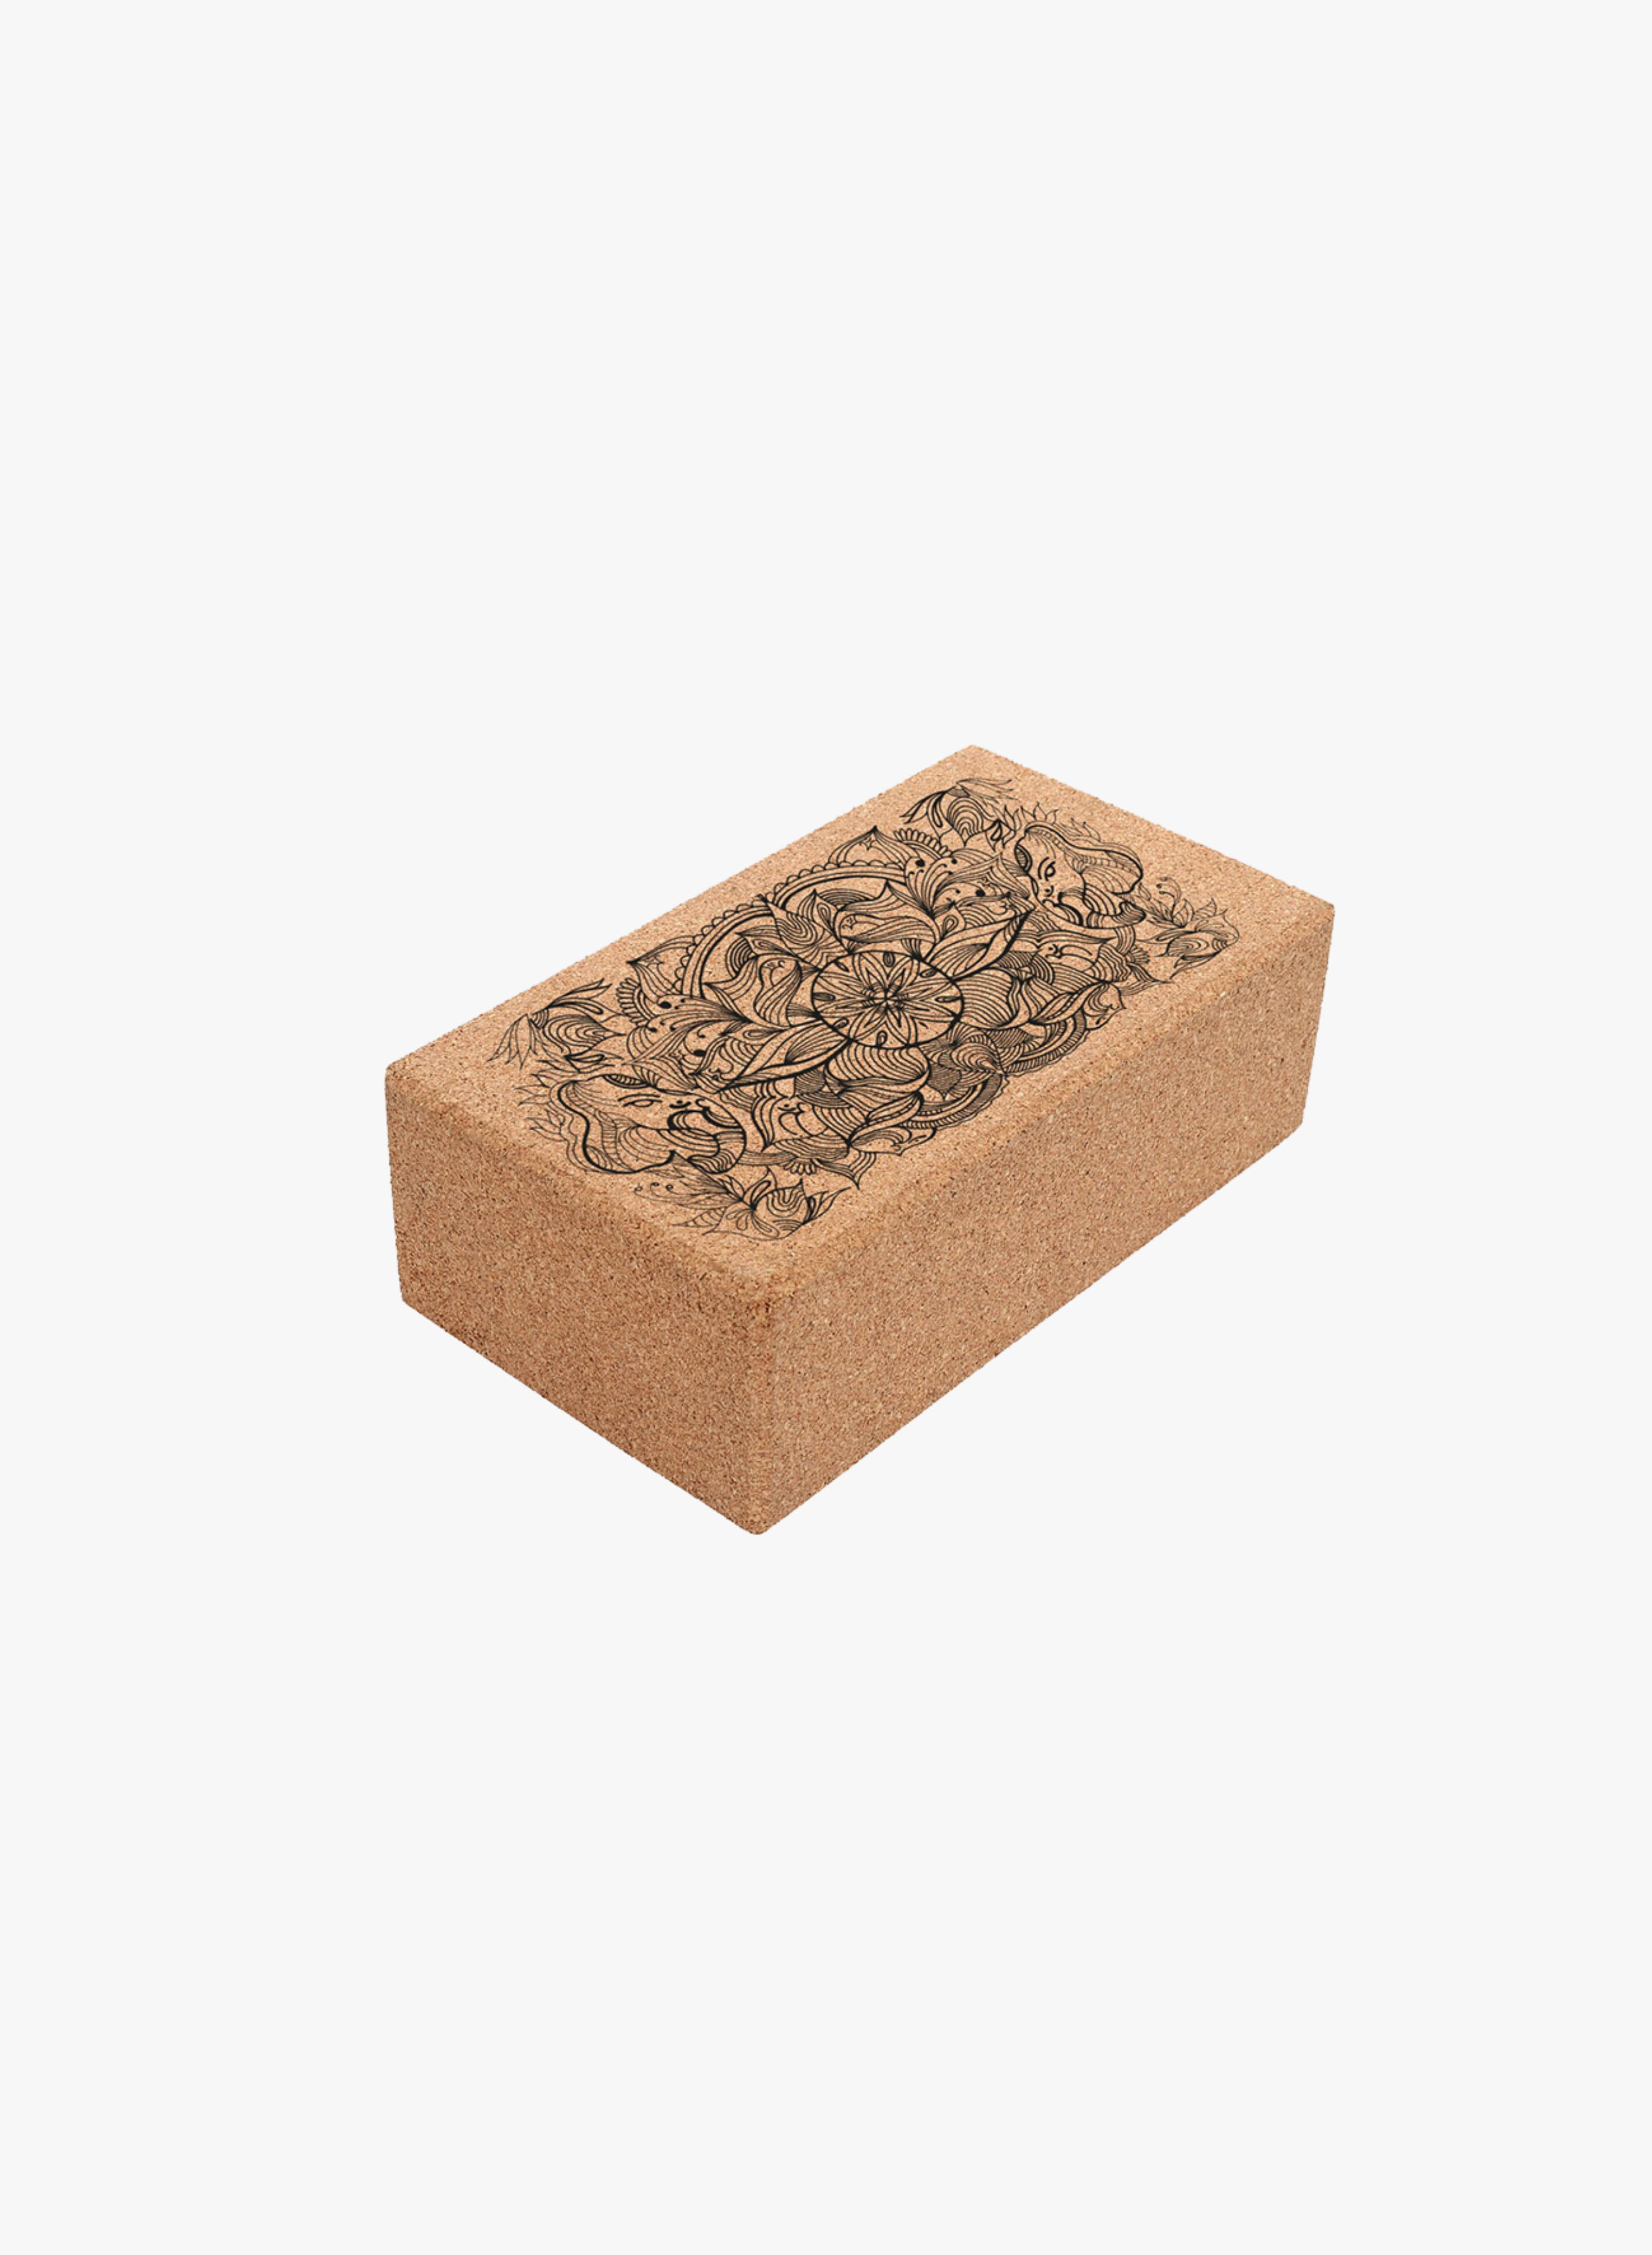 Lift Cork Yoga Block - Sustainable and supportive yoga prop for enhanced poses. Elevate your practice with the best cork blocks. Explore now!